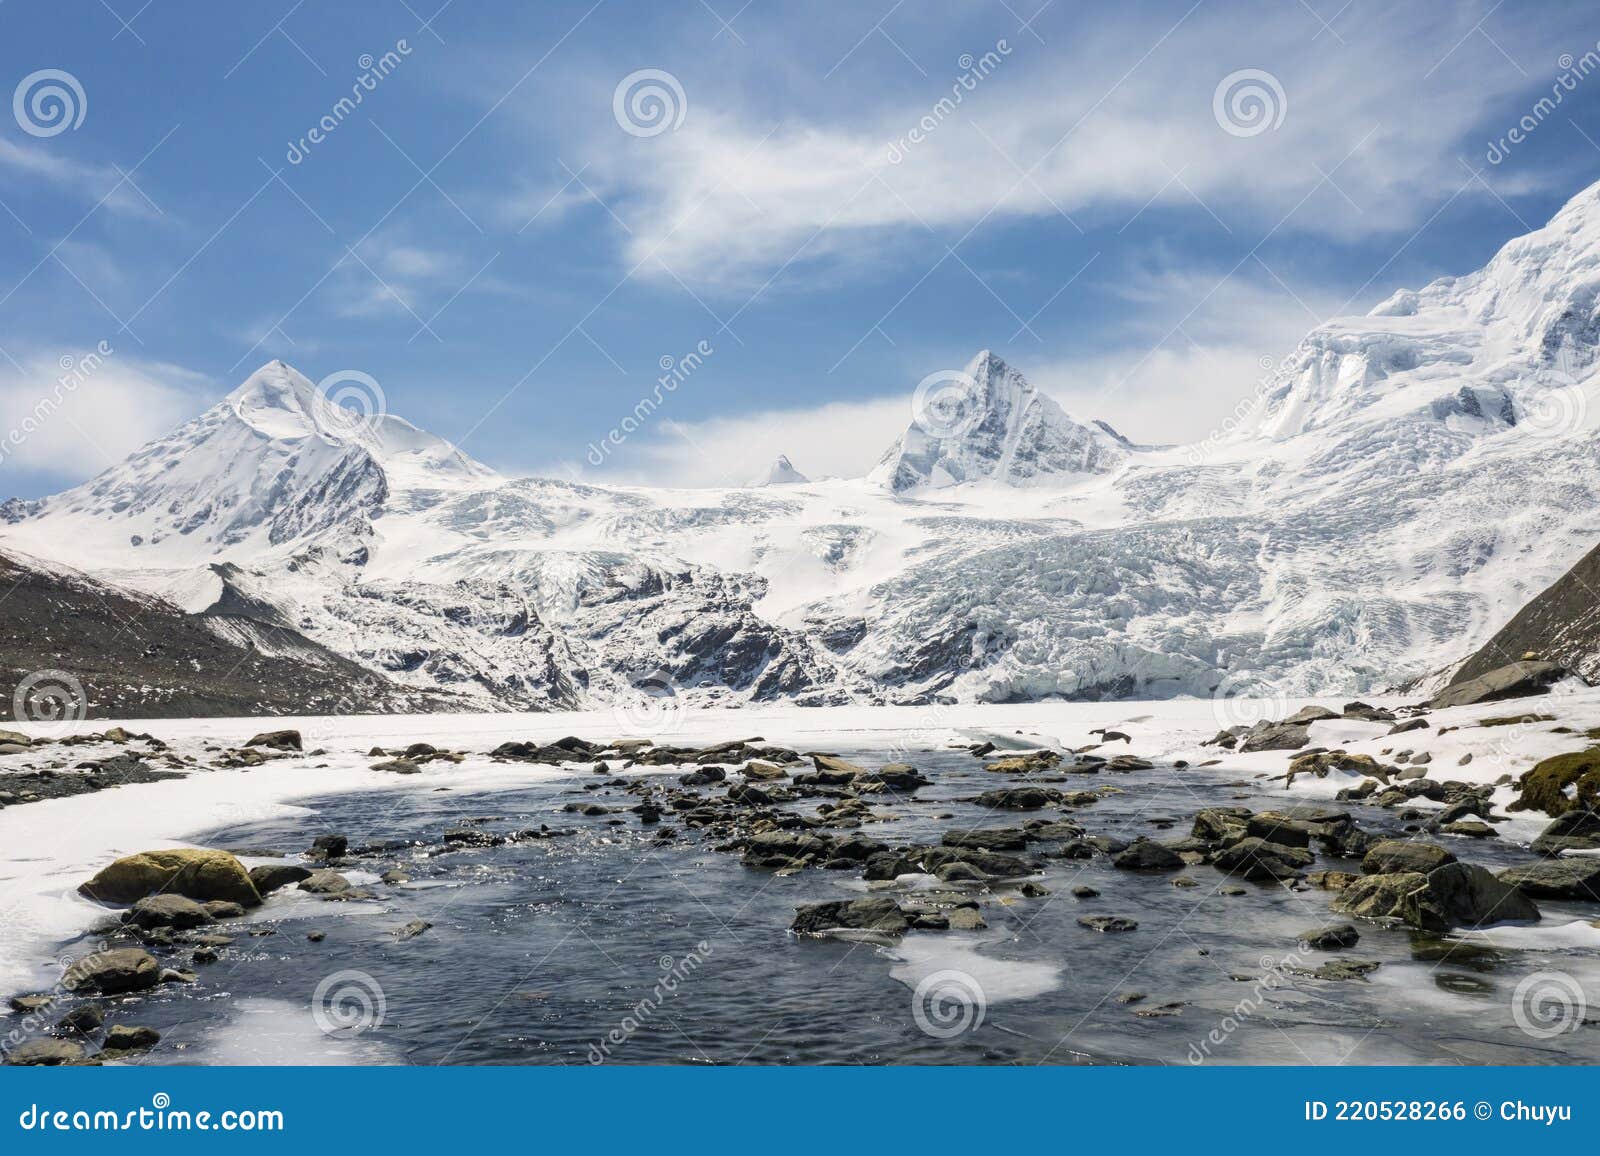 banaan Ontbering Handvol Snow Mountain and Glacial Landscape Stock Photo - Image of religion,  famous: 220528266